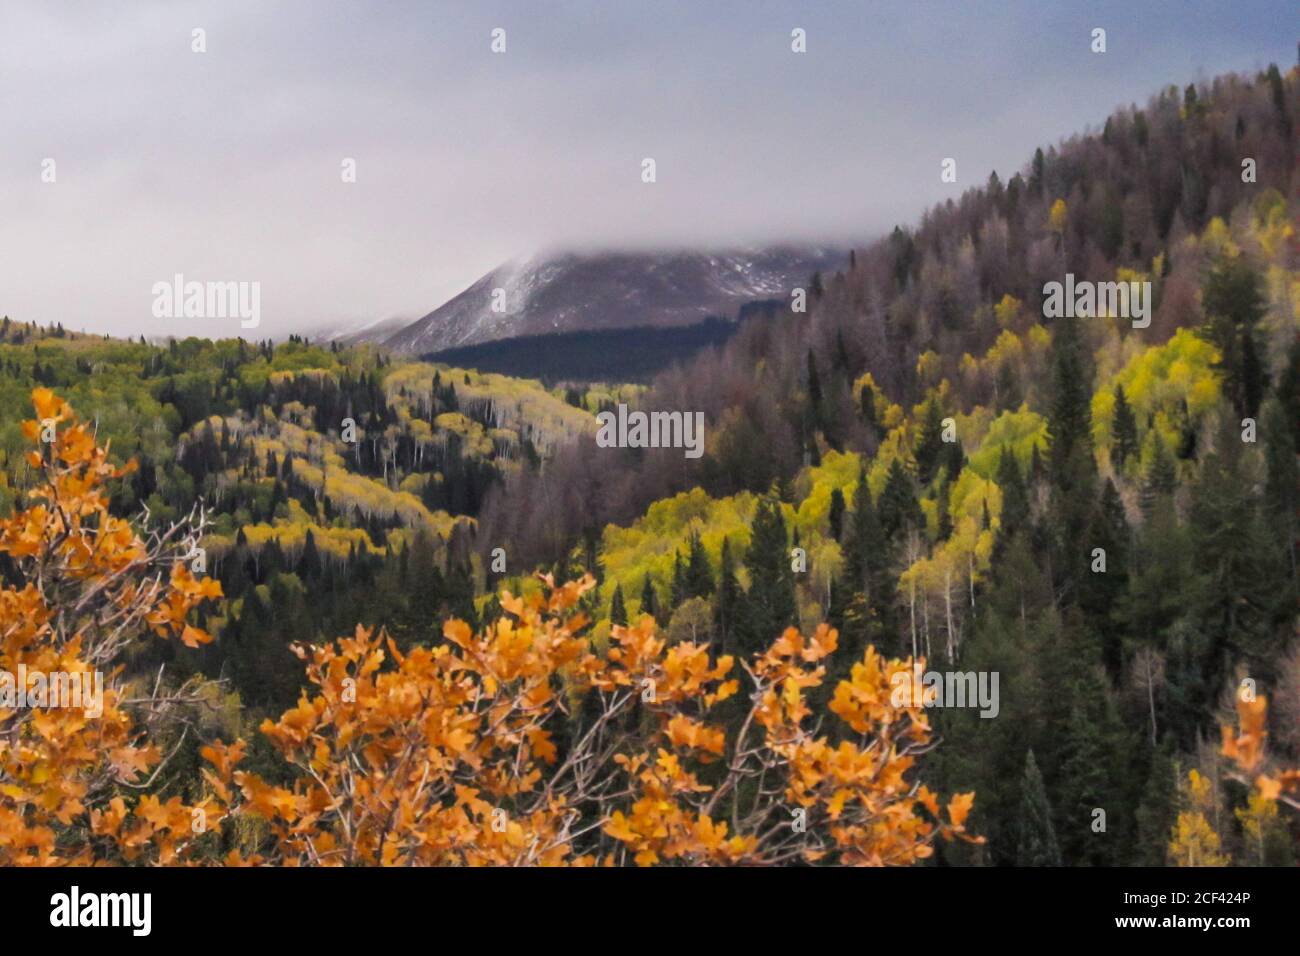 The conifer and aspen covered forested slopes of the La Sal Mountains, of Utah, USA, with the higher mountain peaks in the background Stock Photo